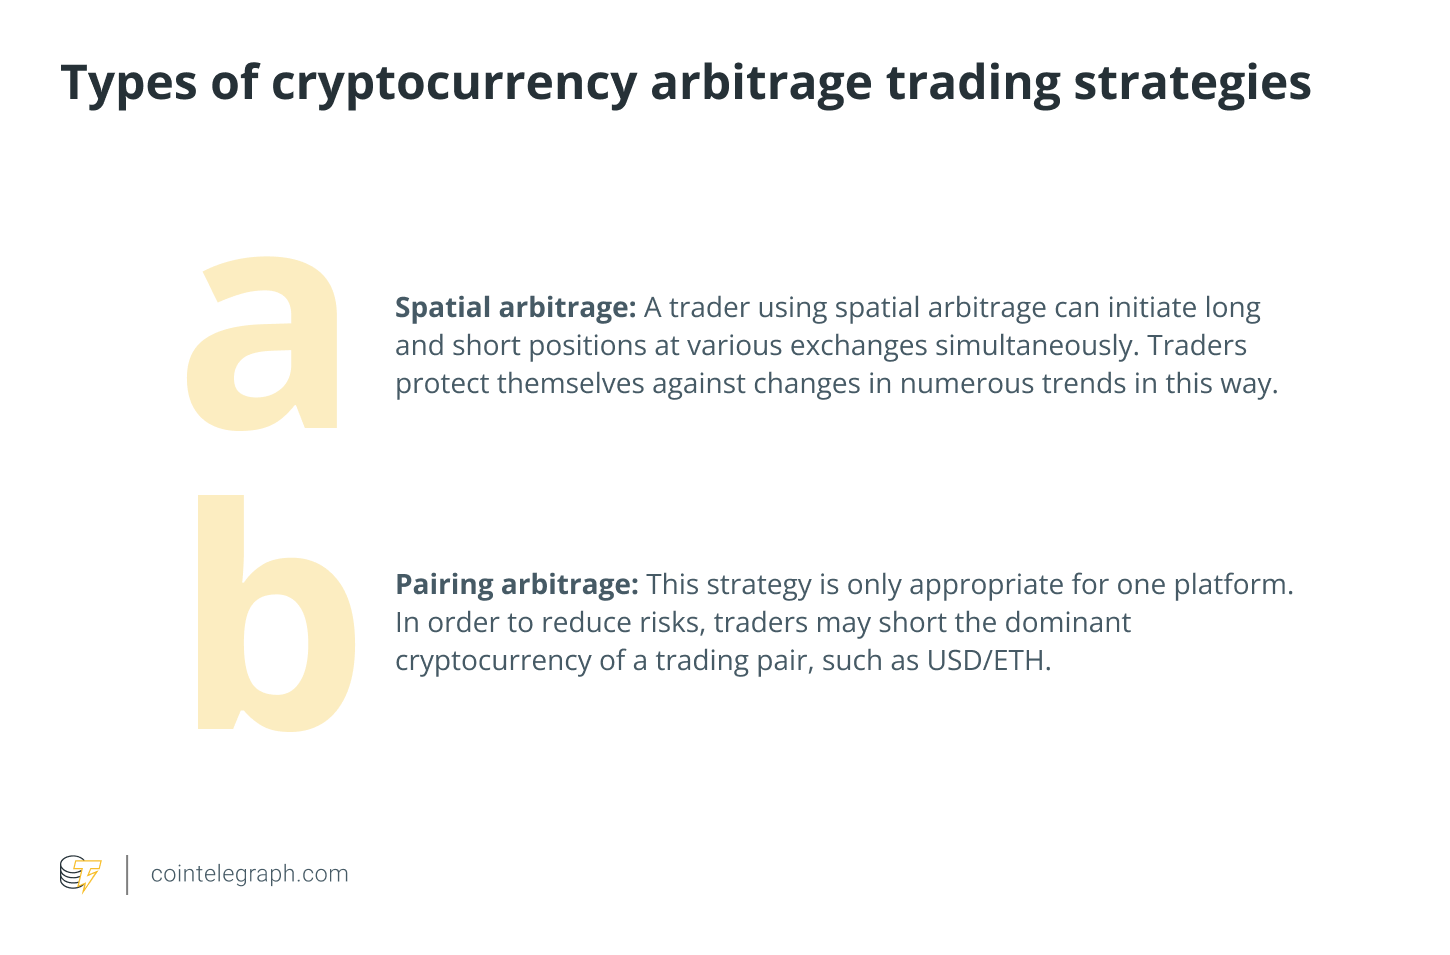 Types of cryptocurrency arbitrage trading strategies